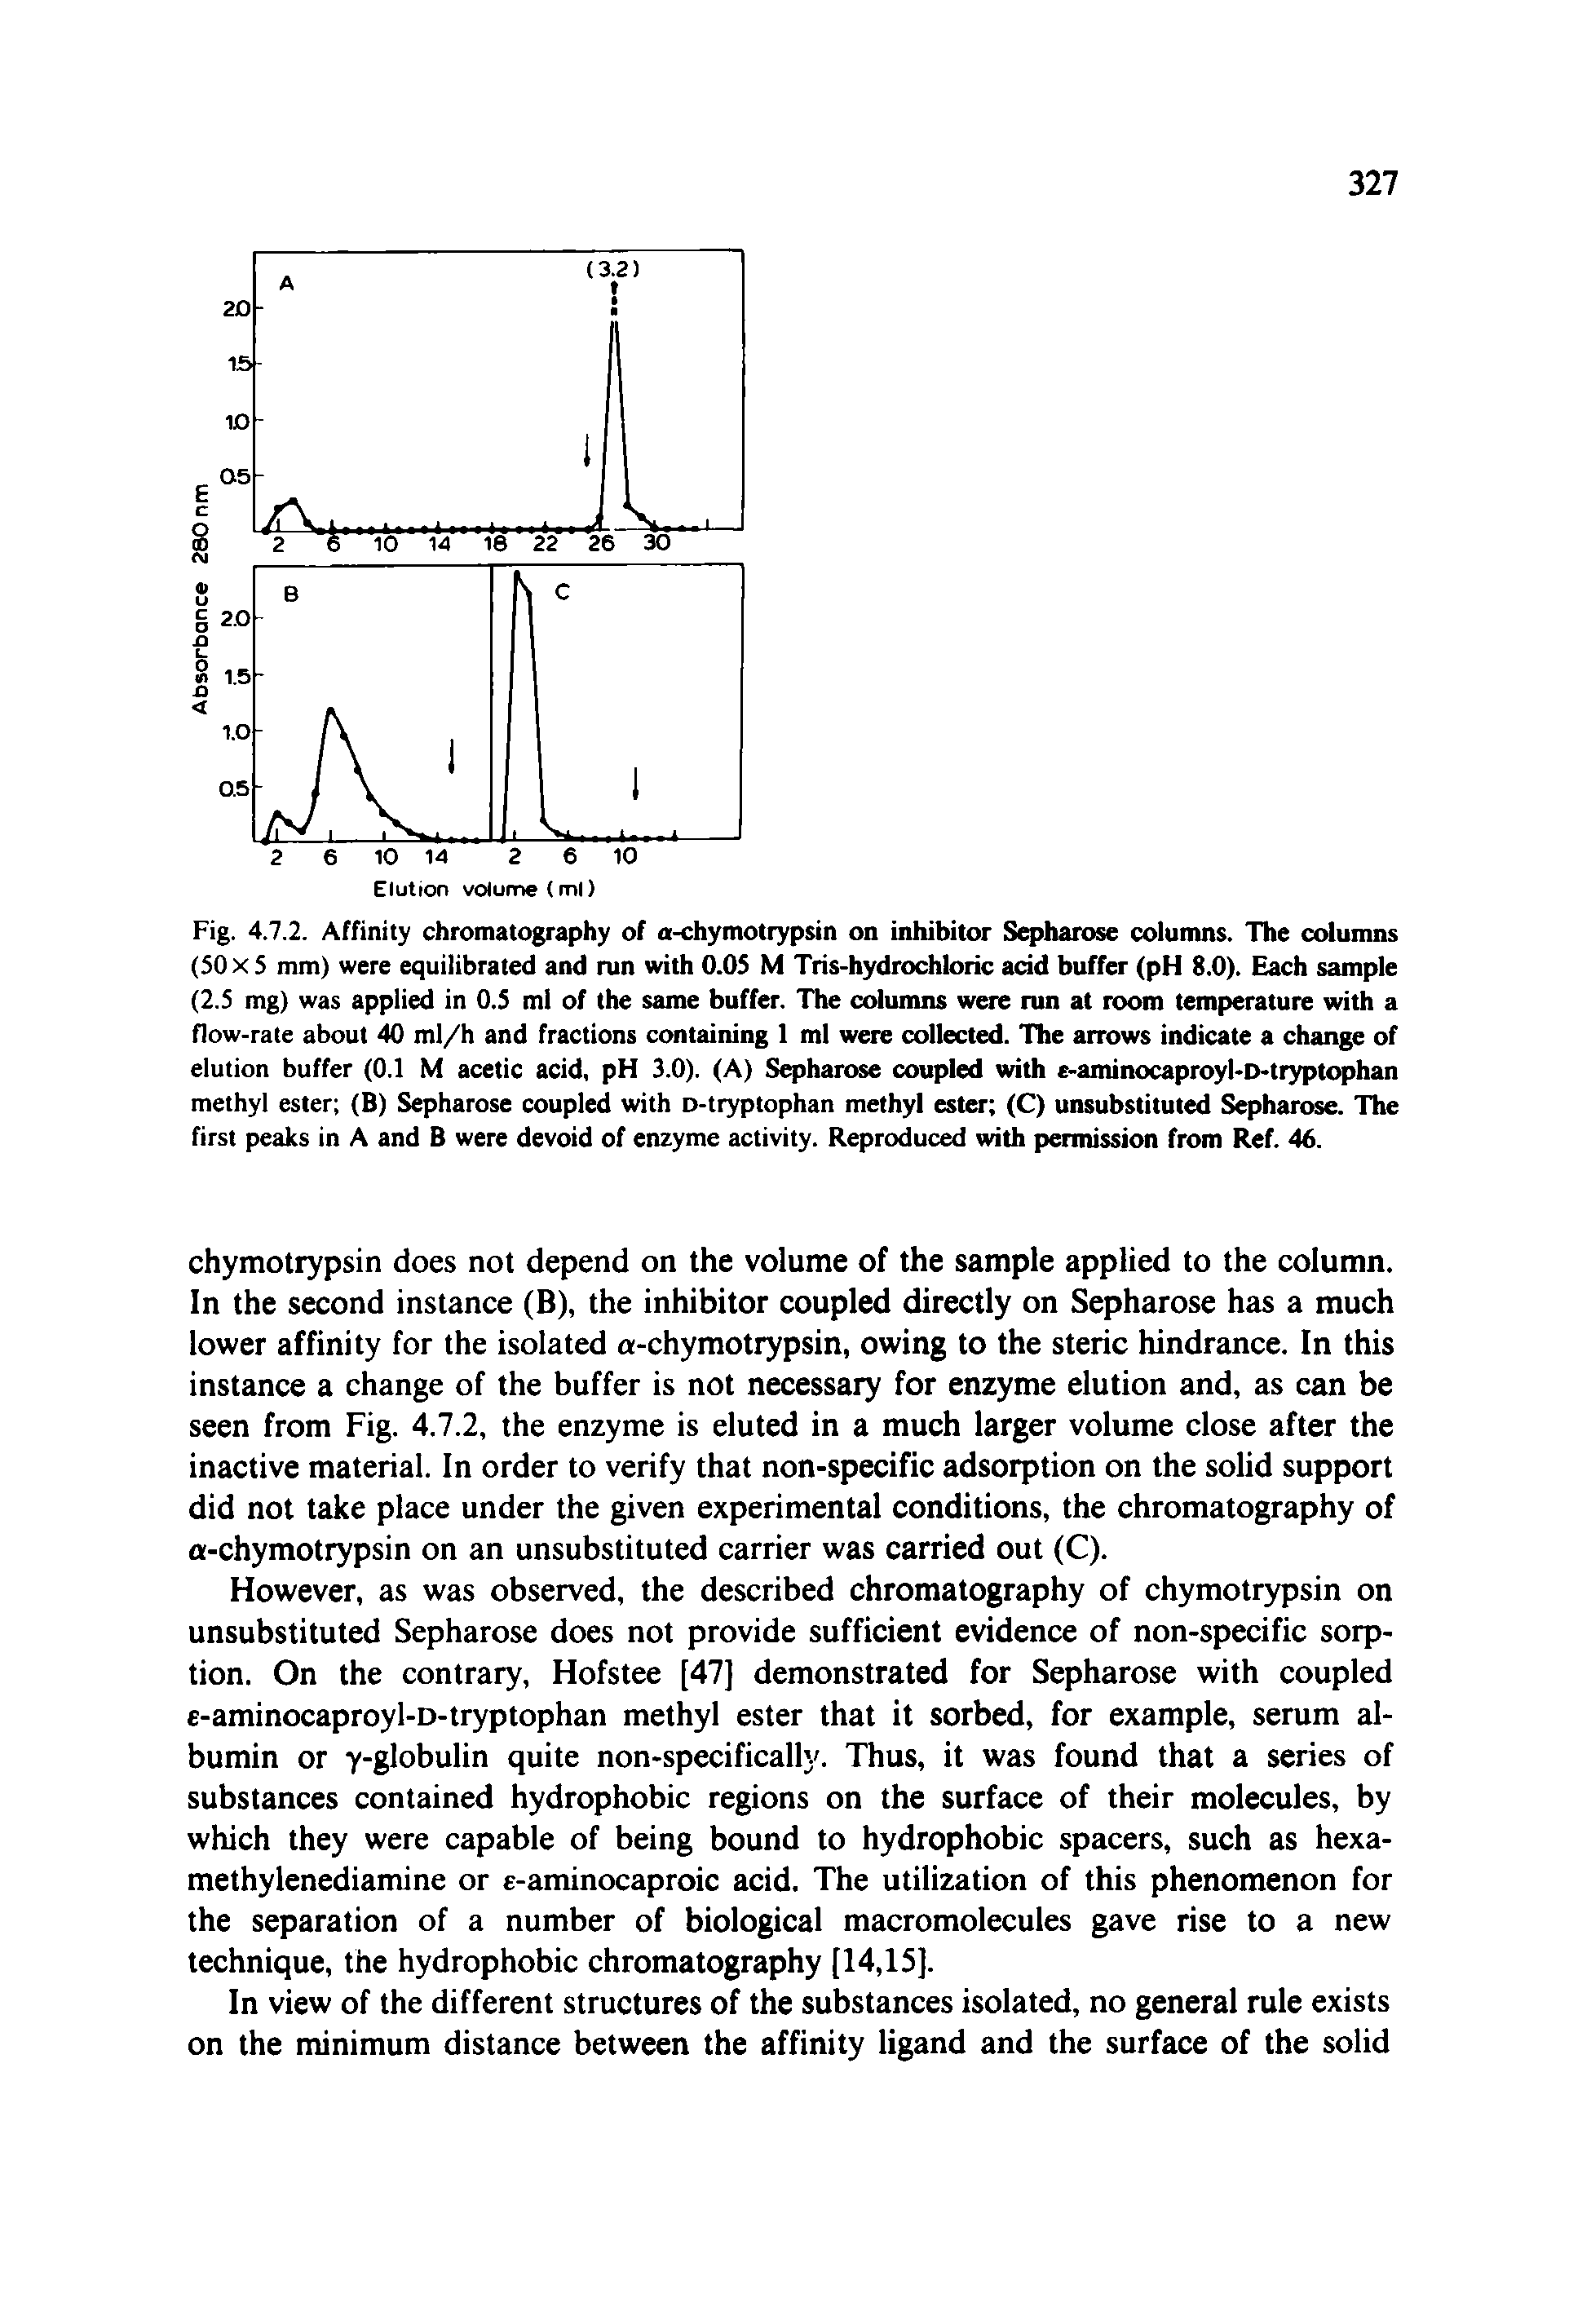 Fig. 4.7.2. Affinity chromatography of a-chymotrypsin on inhibitor Sepharose columns. The columns (50x5 mm) were equilibrated and run with O.OS M Tris-hydrochloric acid buffer (pH 8.0). Each sample (2.5 mg) was applied in 0.5 ml of the same buffer. The columns were run at room temperature with a flow-rate about 40 ml/h and fractions containing 1 ml were collected. The arrows indicate a change of elution buffer (0.1 M acetic acid, pH 3.0). (A) Sepharose coupled with e-aminocaproyl-D-tryptophan methyl ester (B) Sepharose coupled with D-tryptophan methyl ester (C) unsubstituted Sepharose. The first peaks in A and B were devoid of enzyme activity. Reproduced with permission from Ref. 46.